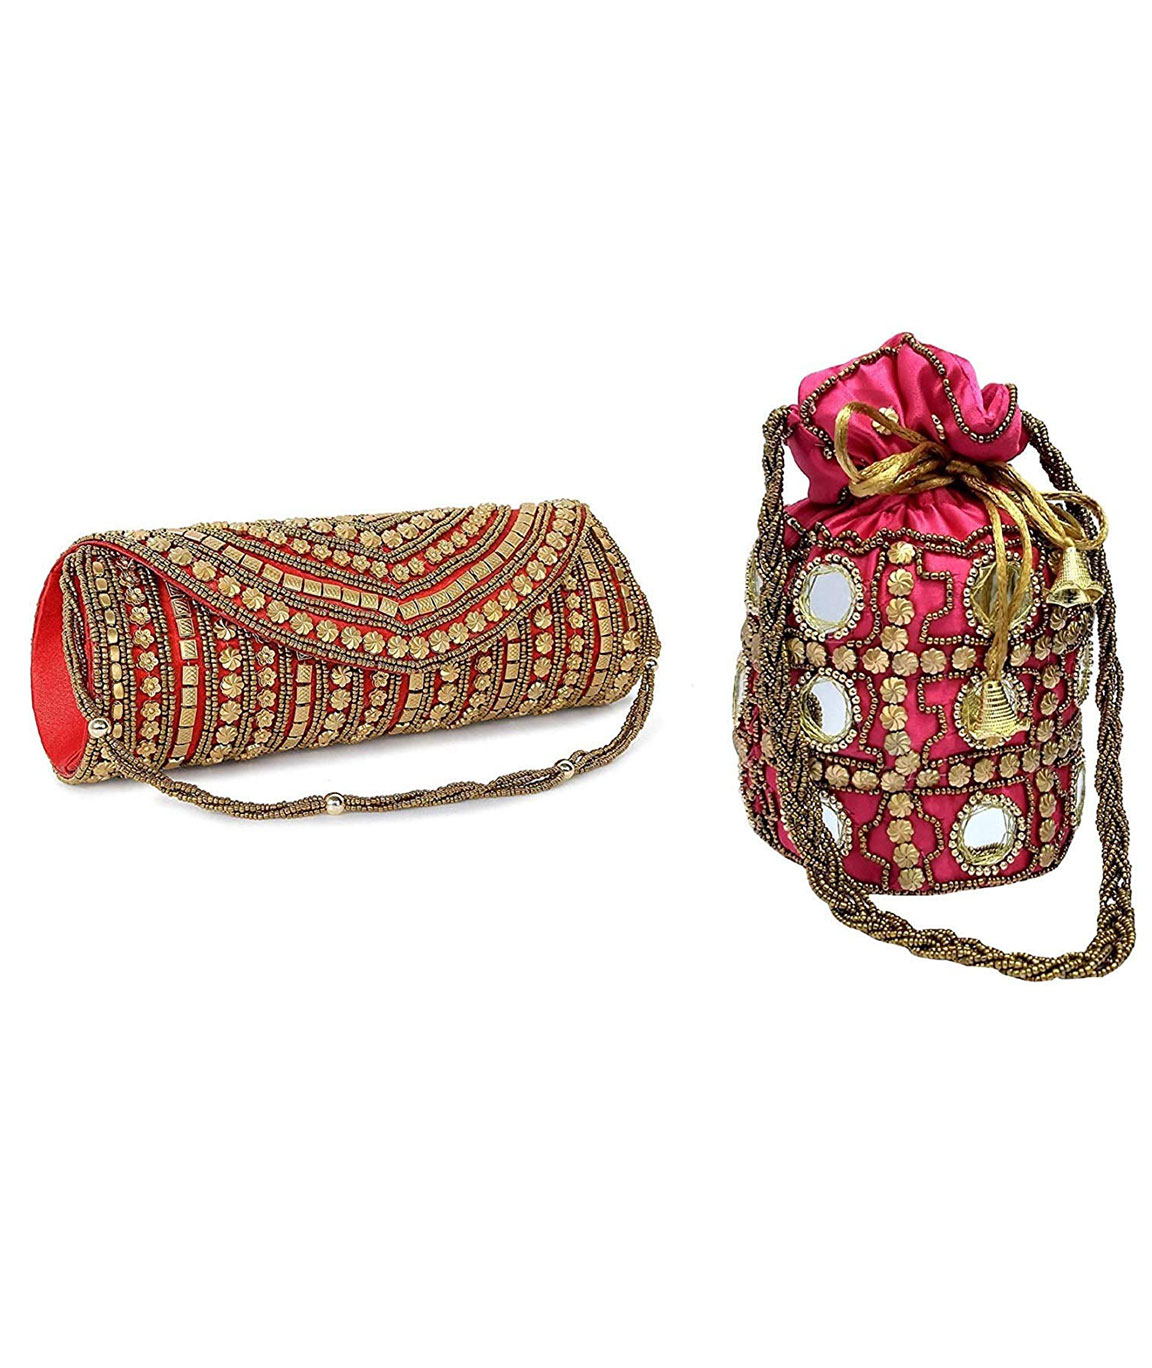 Buy Oval Bridal Red Clutch Purse, Bag With Embroidered Fabric, Zardozi Work  and Sling for Special Event, Evening Party, Anniversary and Wedding. Online  in India - Etsy